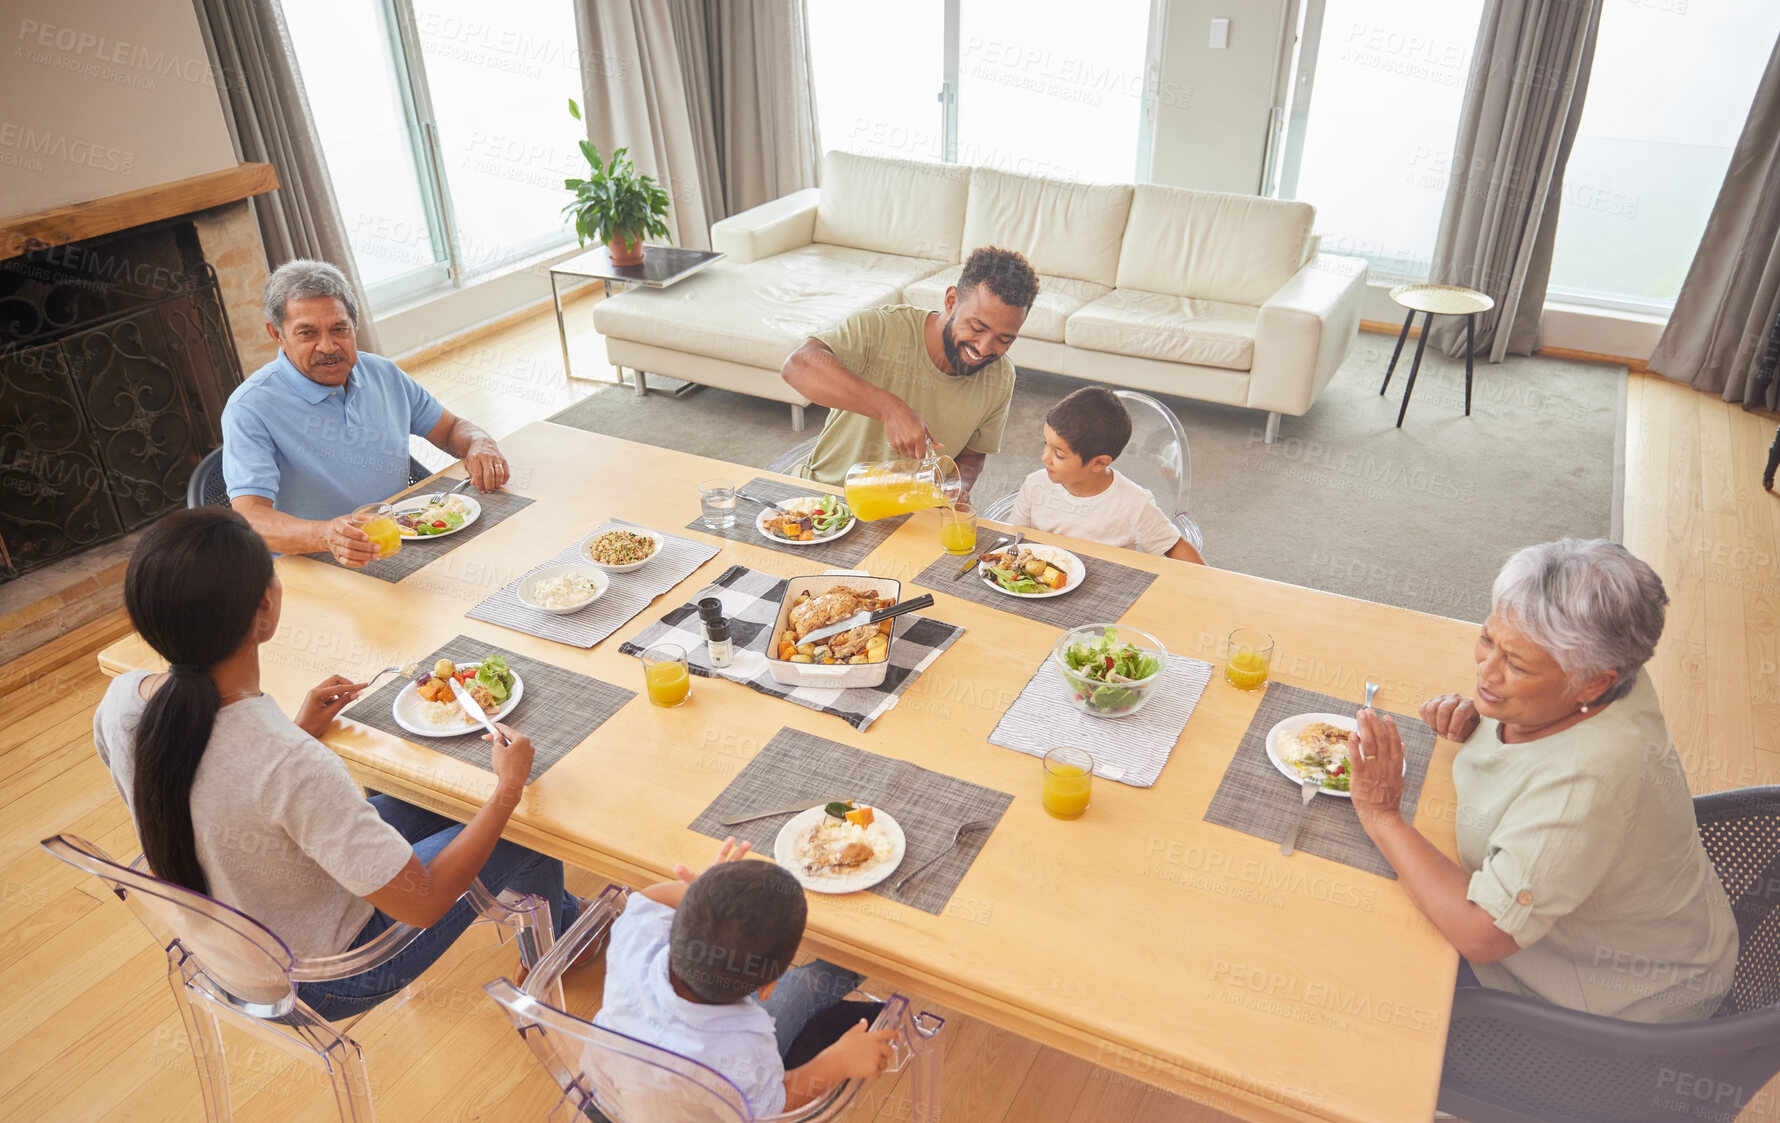 Buy stock photo Overhead view of a mixed race family sitting at a table having lunch  in the lounge at home. Hispanic grandparents having a meal with their kids and grandkids at home